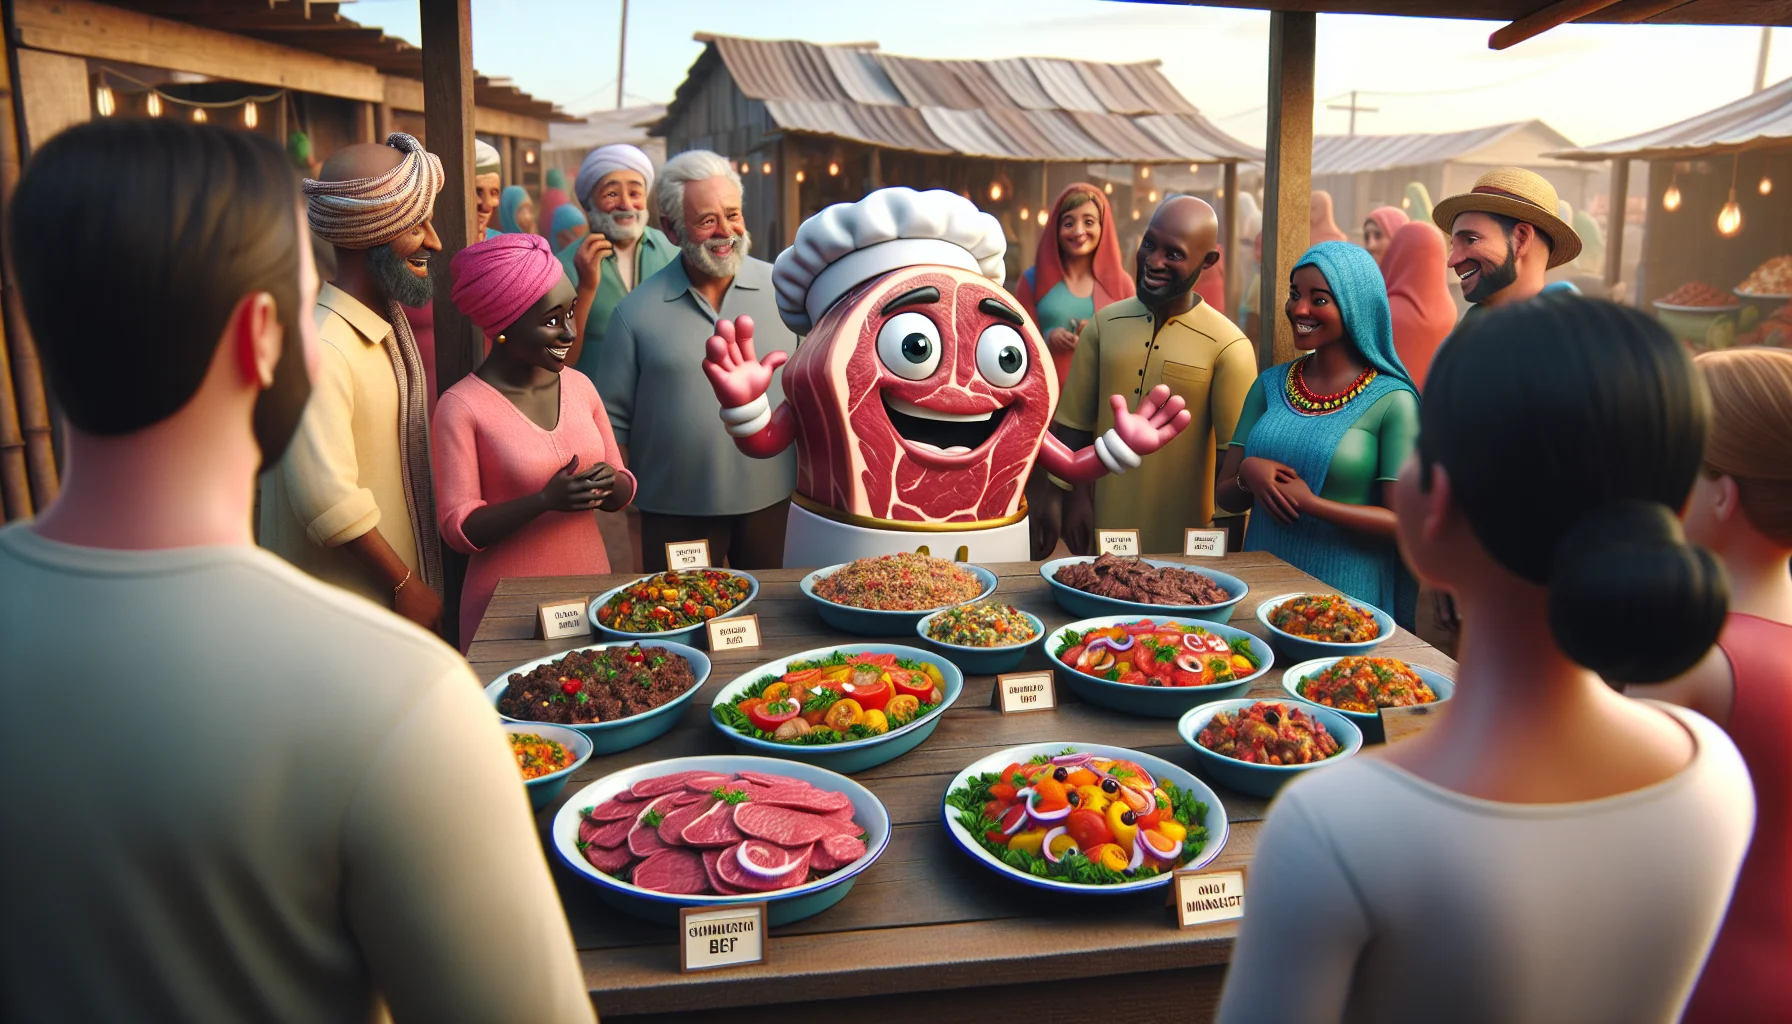 Create a whimsical, highly realistic image showcasing a variety of enticing, low-cost, healthy chuck beef recipes. The scene is in a lively village market, and an animated chuck beef character, with expressive eyes and charming smile, is showing off the finished dishes to customers. Each dish is labeled and vibrantly colored, highlighting its freshness. The customers are a diverse group of men and women of different descents including Caucasian, Black, Middle-Eastern, South Asian, and Hispanic. The customers, amused by the chuck character, are demonstrating interest and curiosity towards the healthy food options.